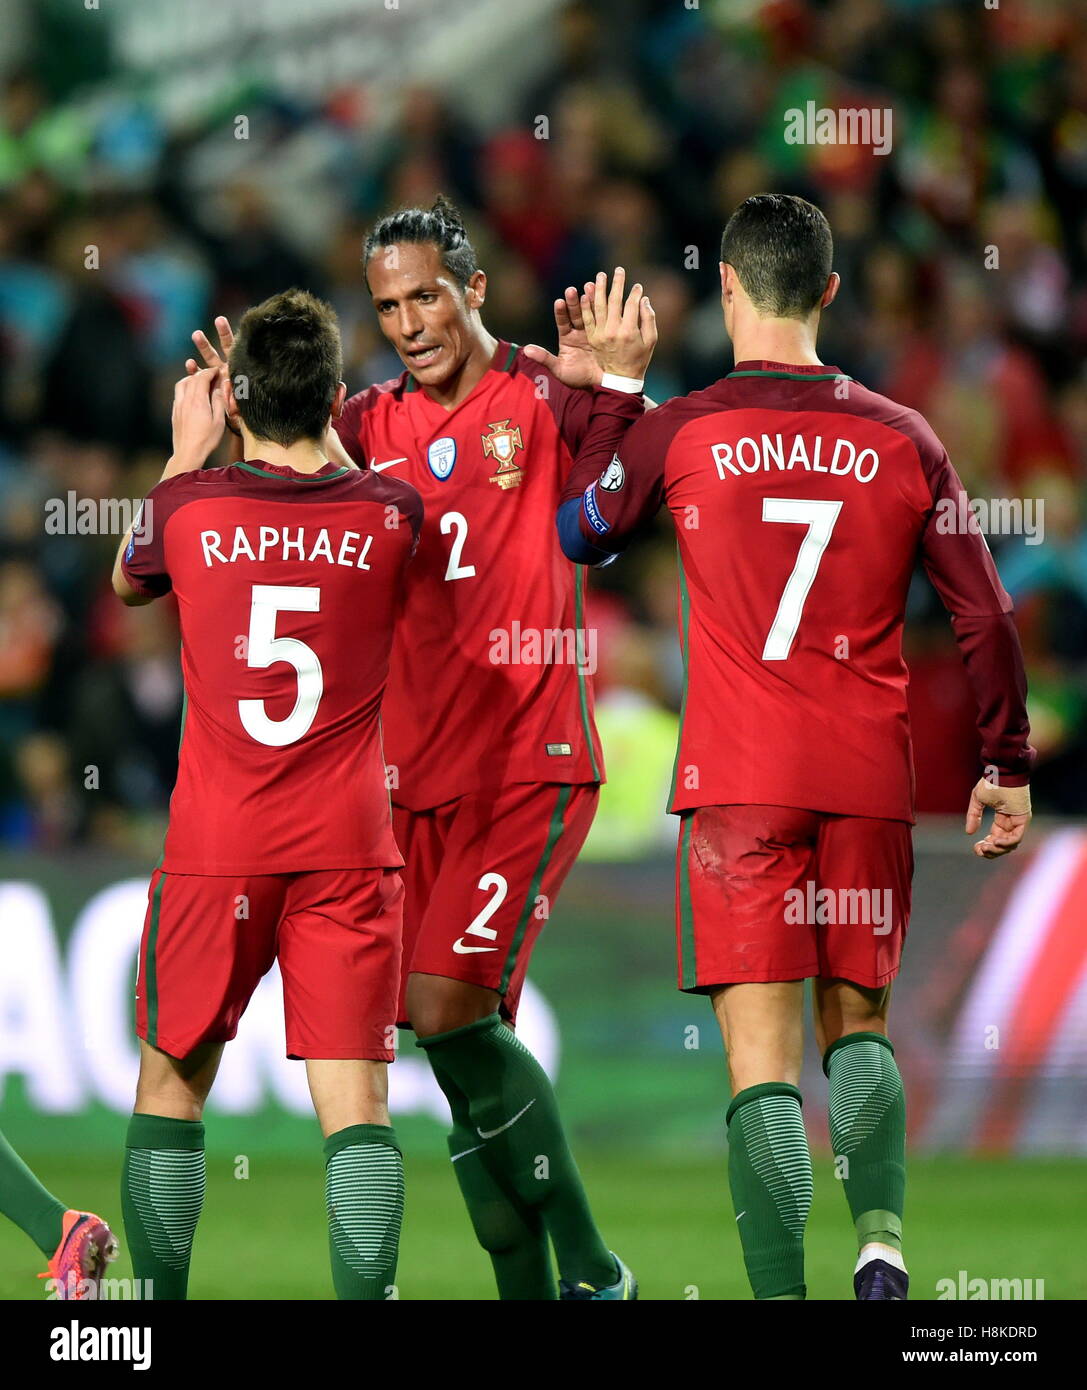 Faro, Portugal. 13th Nov, 2016. Portugal's Bruno Alves (C) celebrates after scoring during the FIFA World Cup 2018 qualifier Group B match between Portugal and Latvia at the Algarve stadium in Faro, Portugal, on Nov. 13, 2016. Portugal won 4-1. Credit:  Zhang Liyun/Xinhua/Alamy Live News Stock Photo